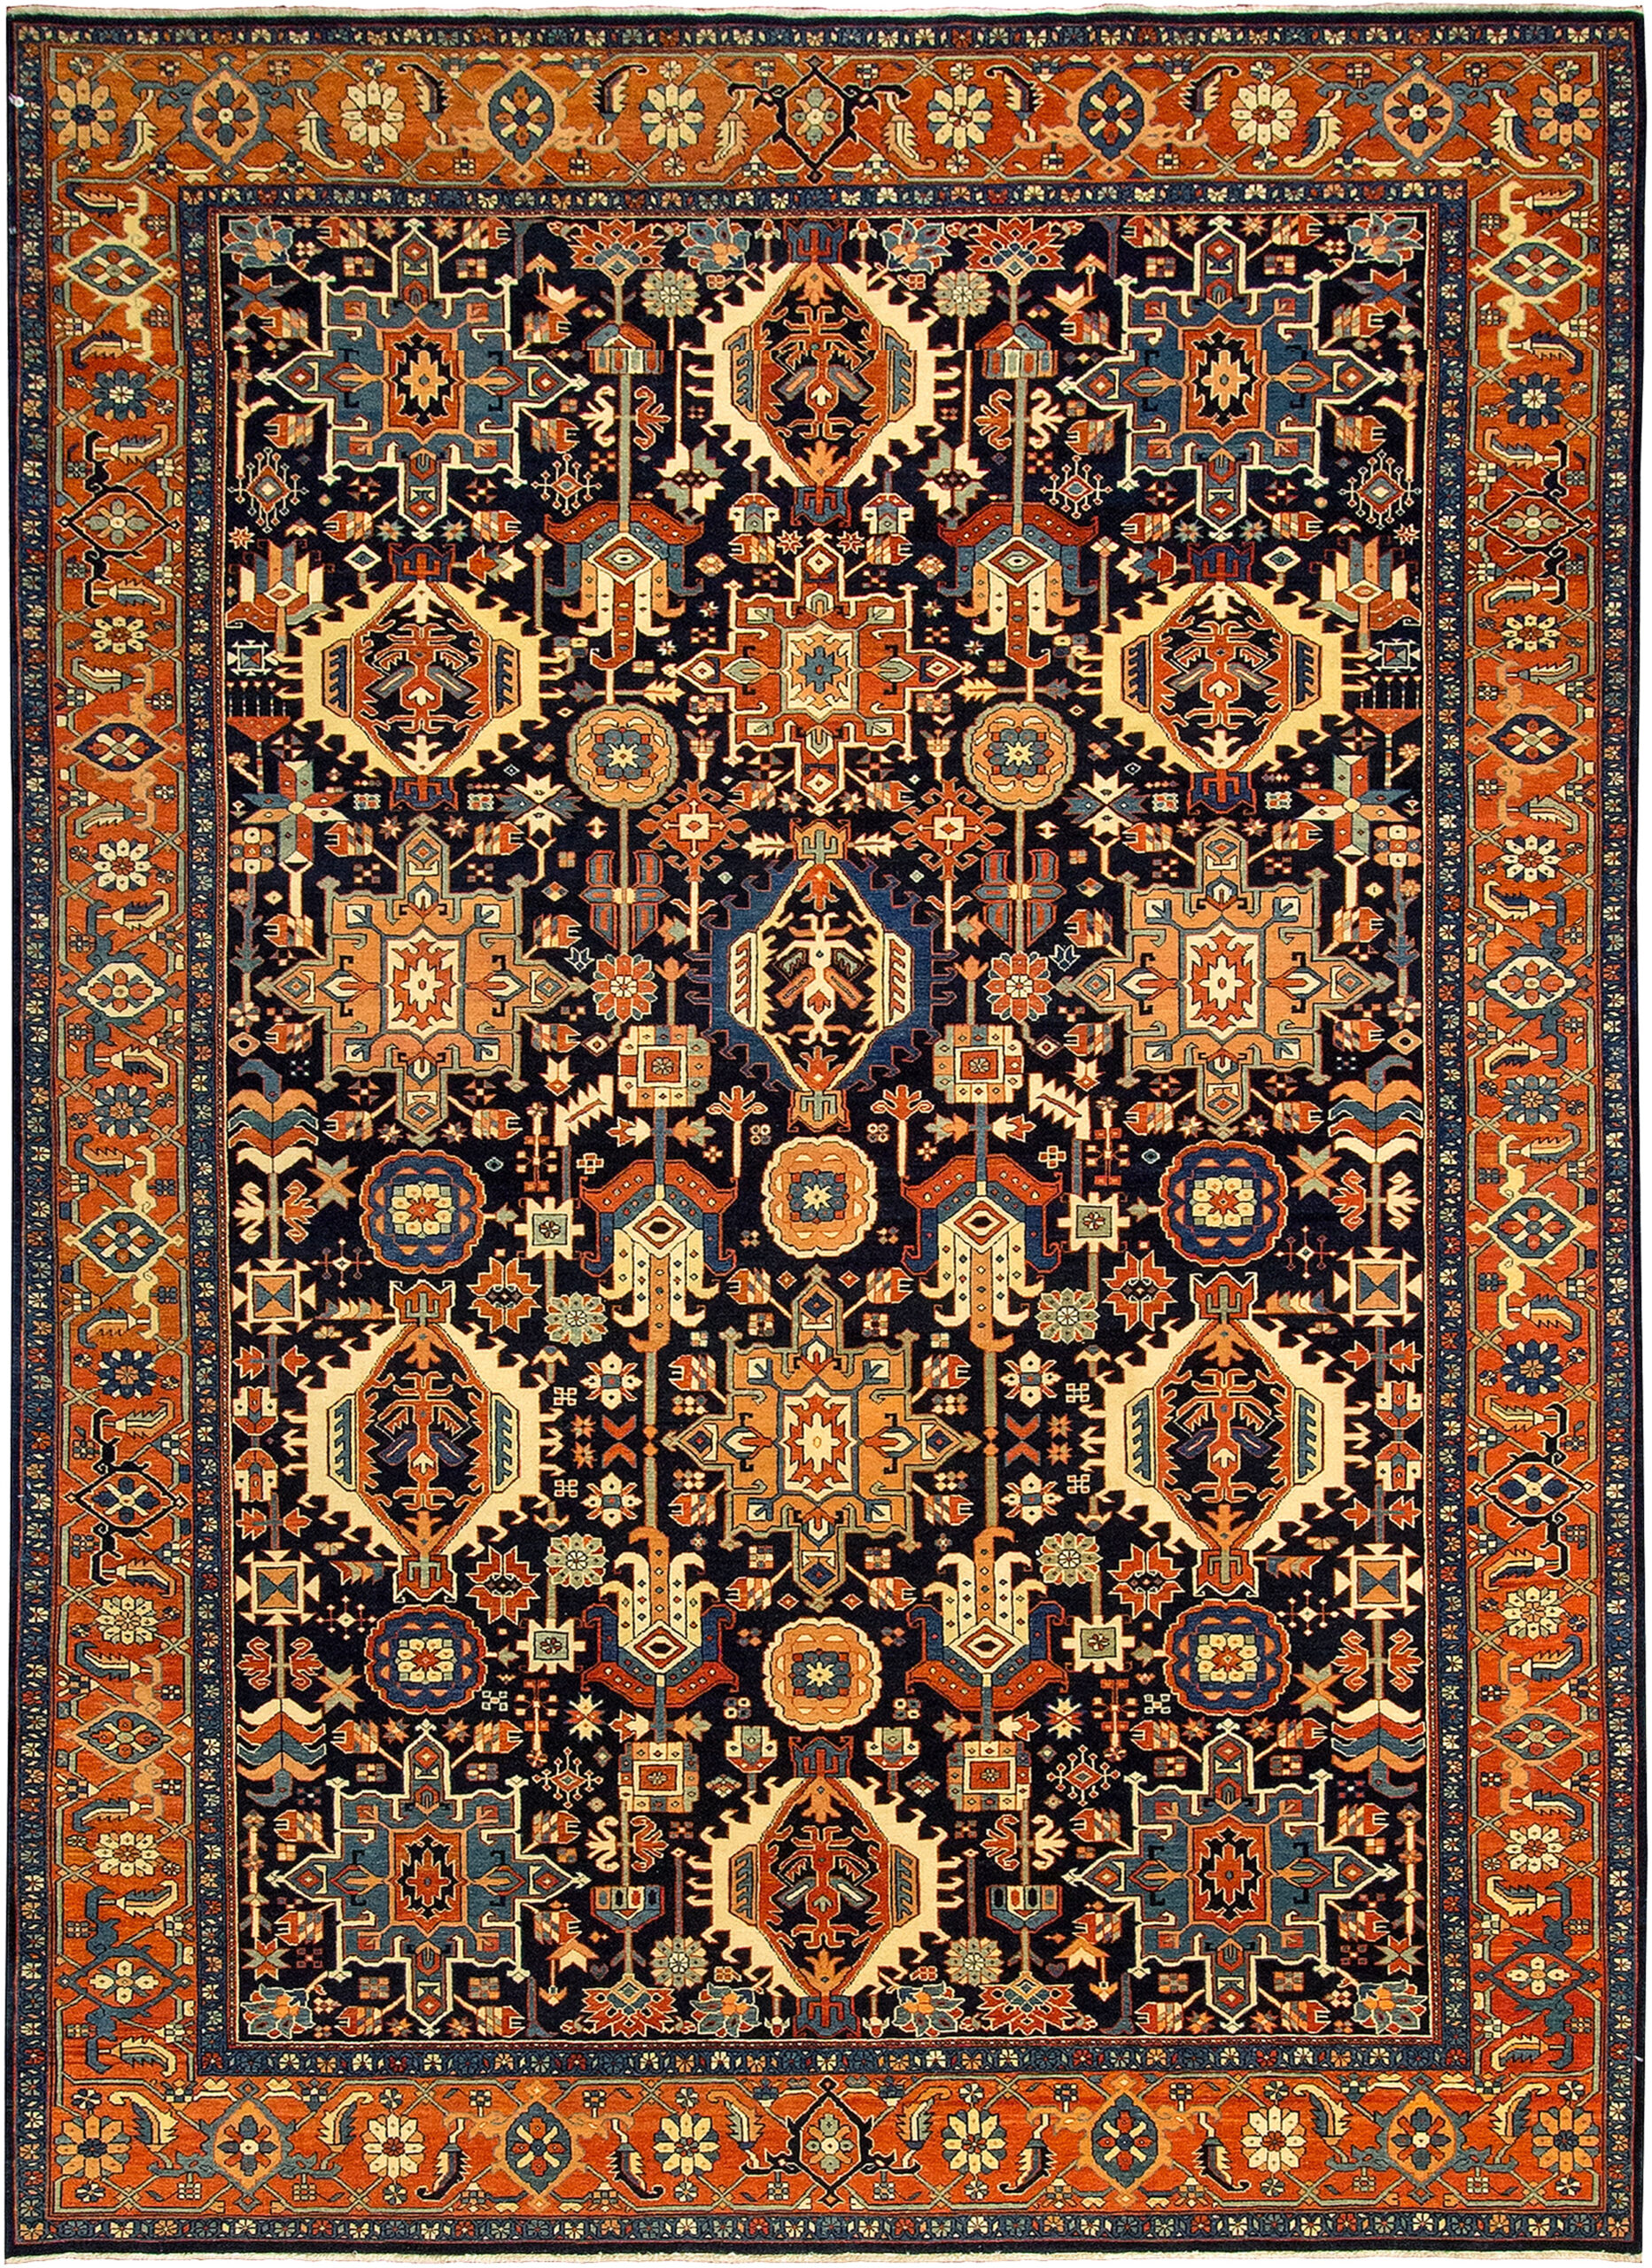 Contemporary hand woven Turkish carpet in the style of antique Persian Karaja carpets from the Heriz district in northwest Persia's Azerbaijan province. The navy field is decorated with medallions. Douglas Stock Gallery antique and contemporary Oriental rugs Boston,MA area, South Natick, Oriental rugs